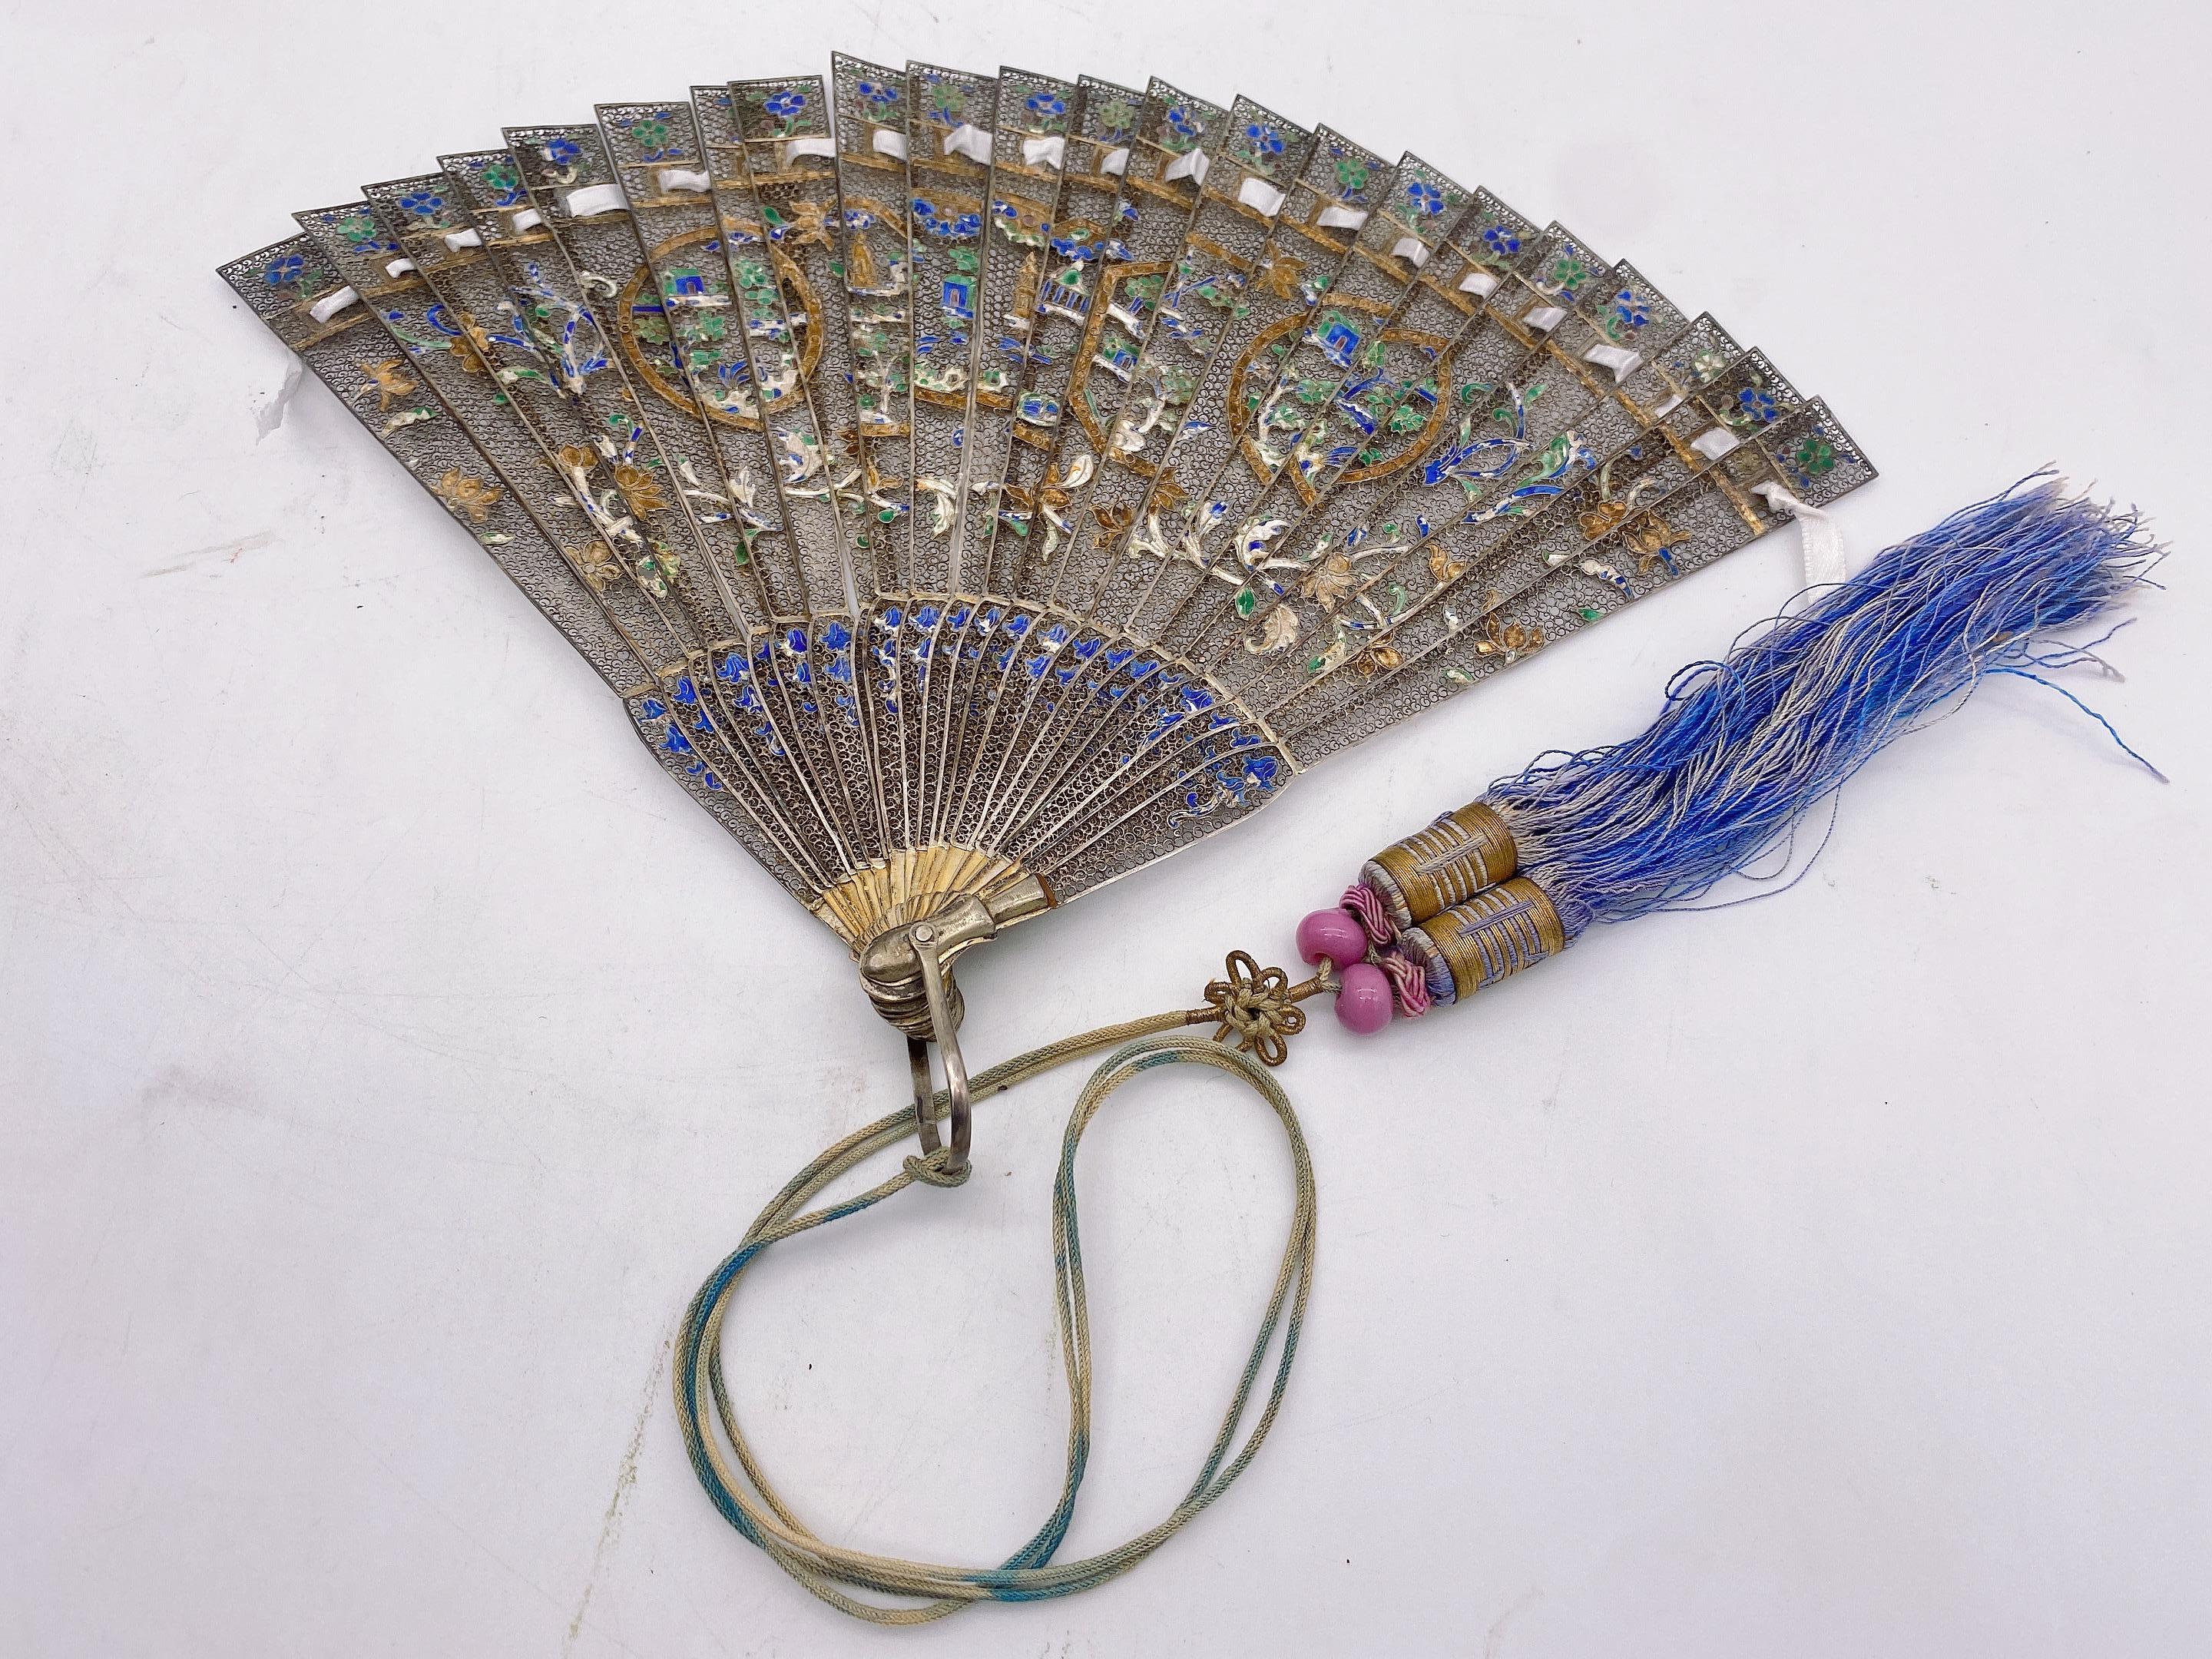 Rare Antique  Qing Dynasty Chinese Gilt Silver Filigree And Enamel Brise Fan For Sale 2